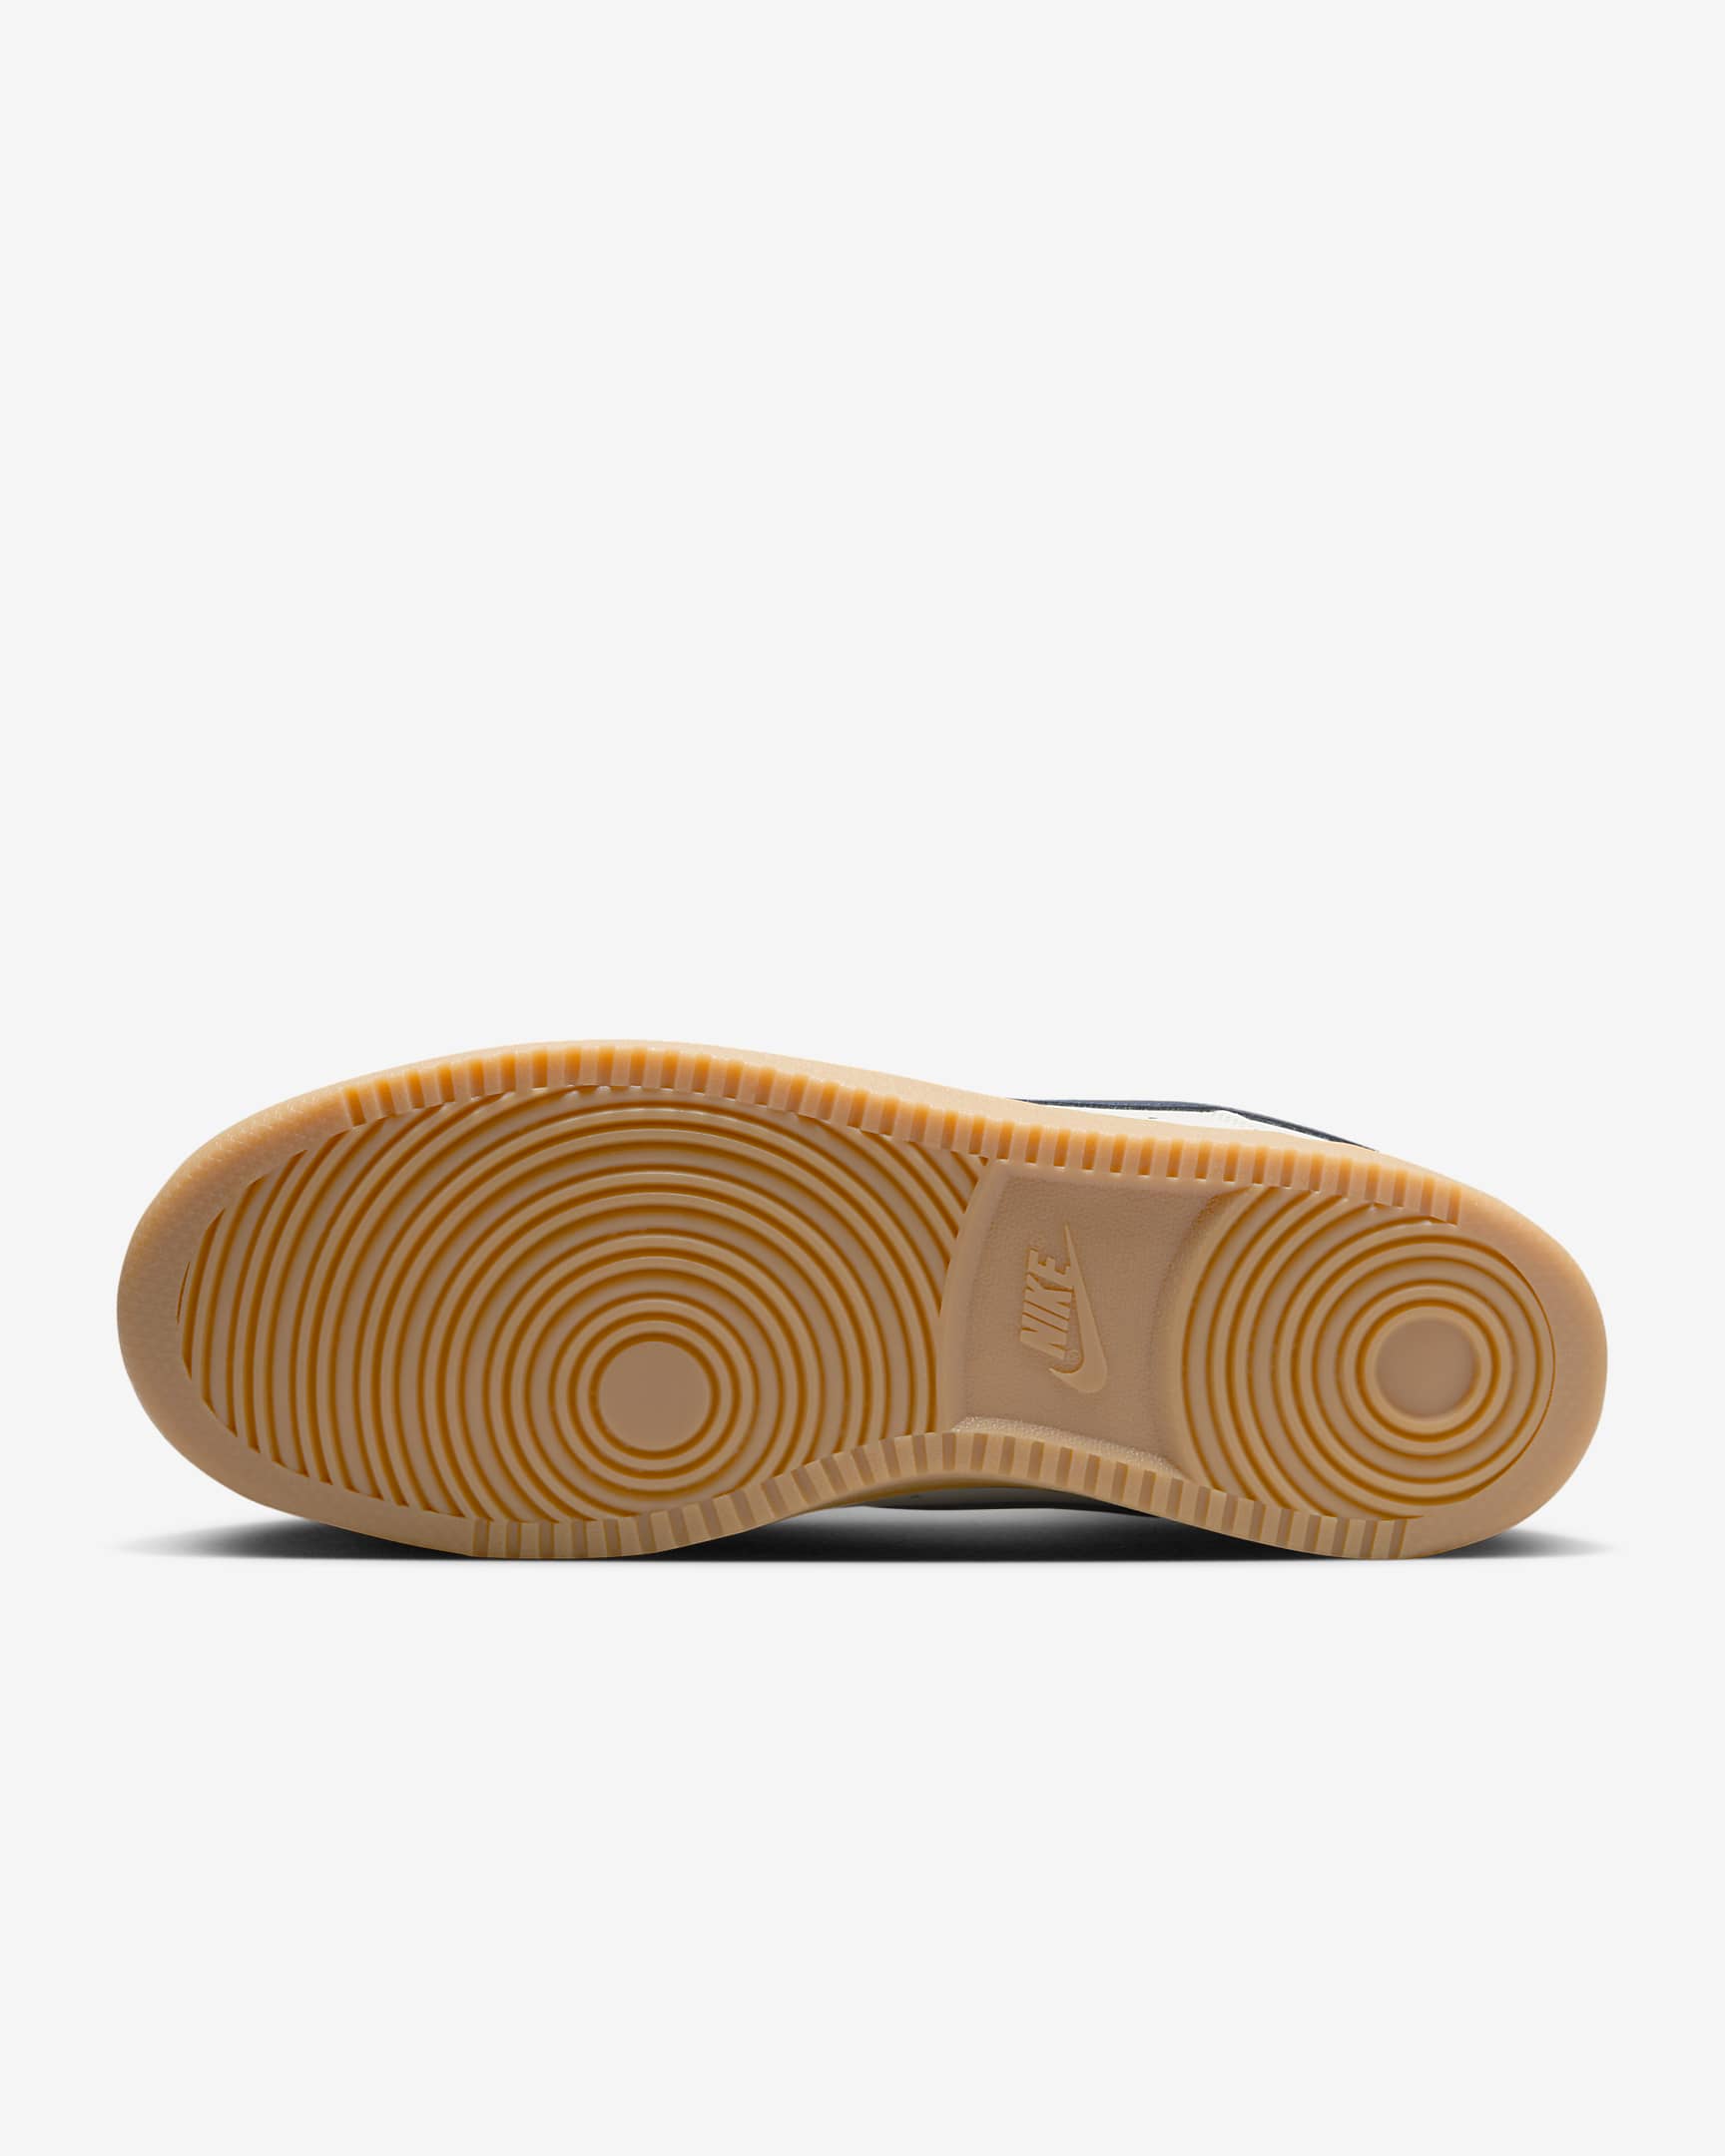 Nike Court Vision Low Men's Shoes - Sail/Gum Light Brown/Light Iron Ore/Midnight Navy